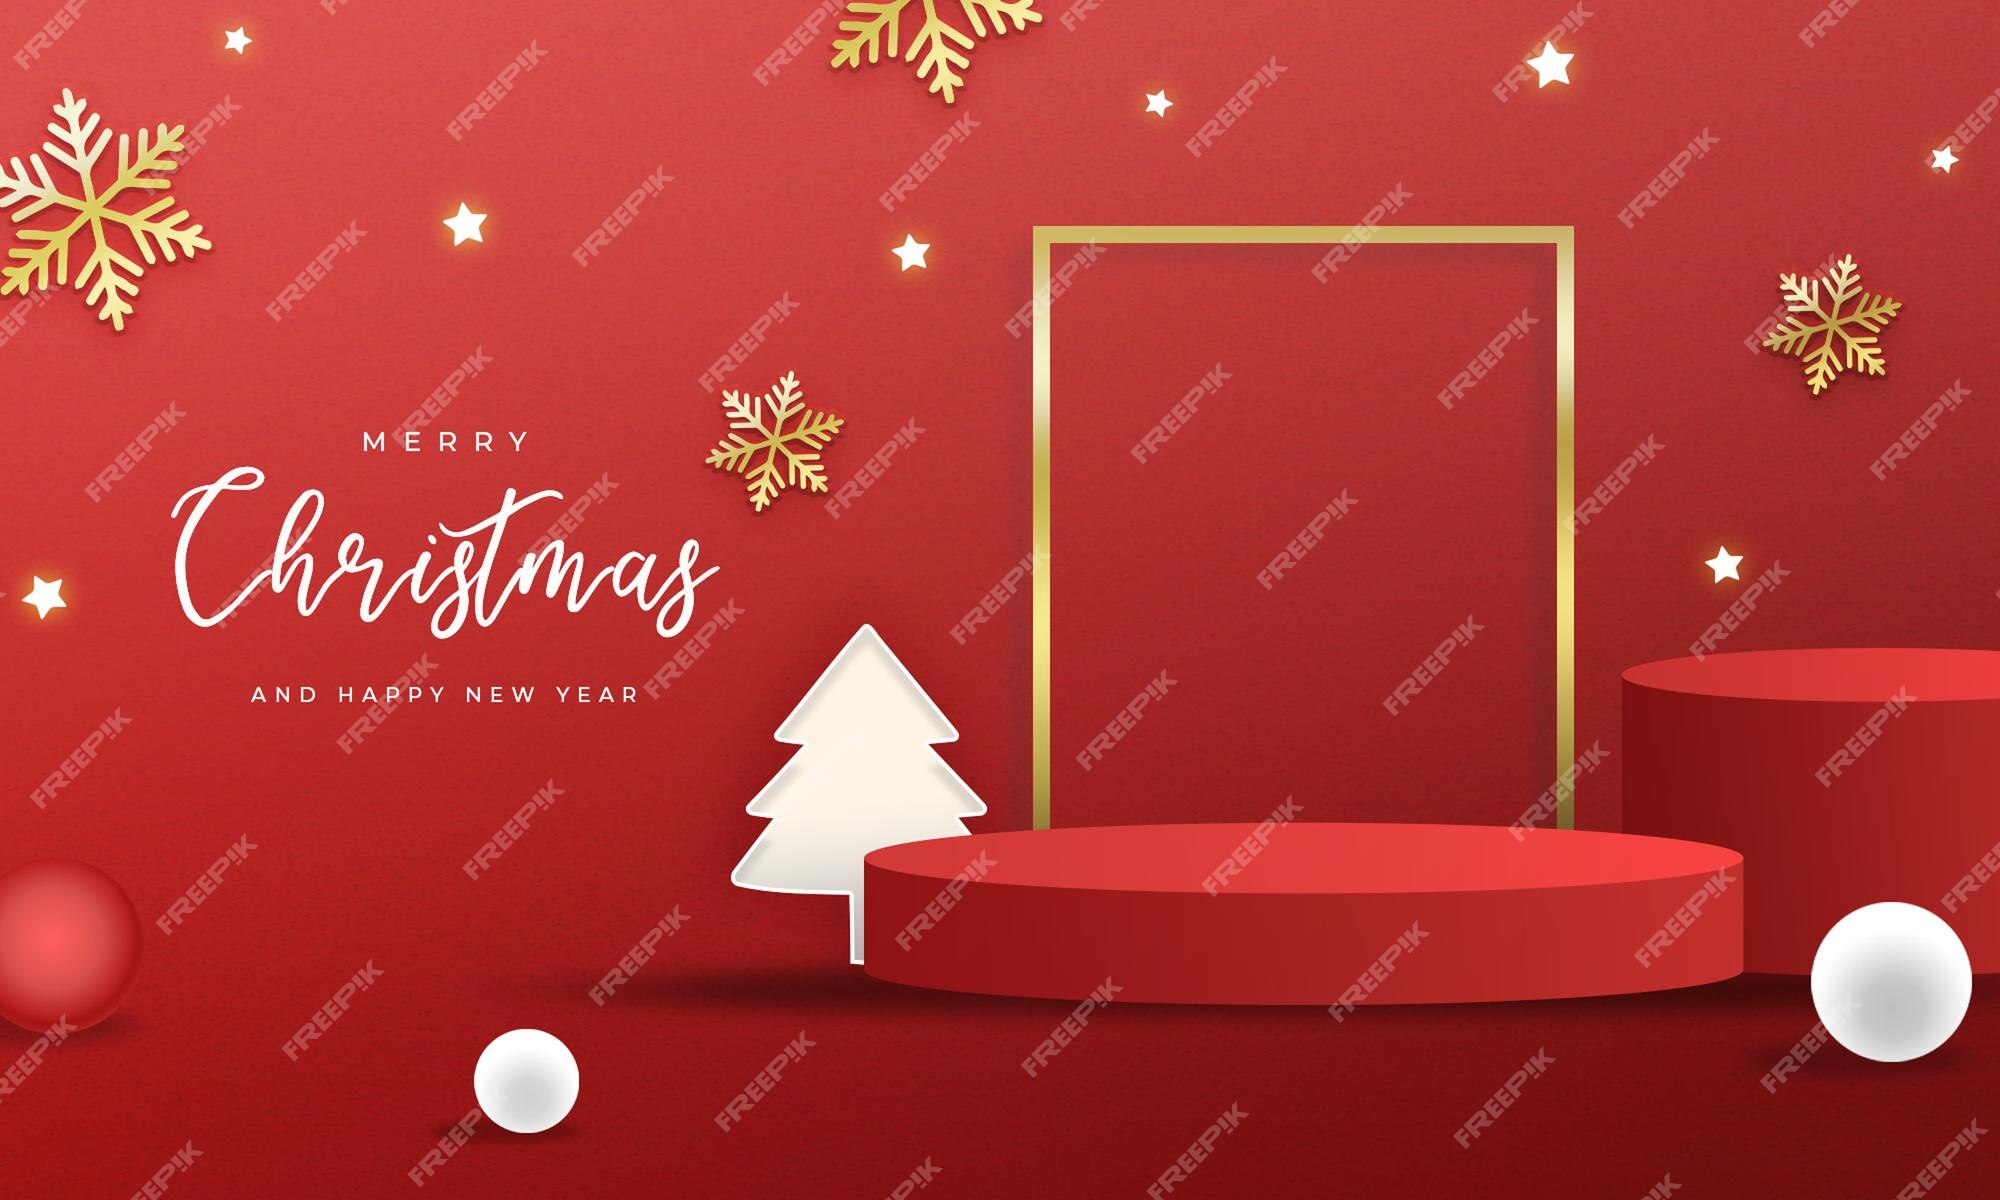 Premium PSD | Merry christmas and new year banner with product podium